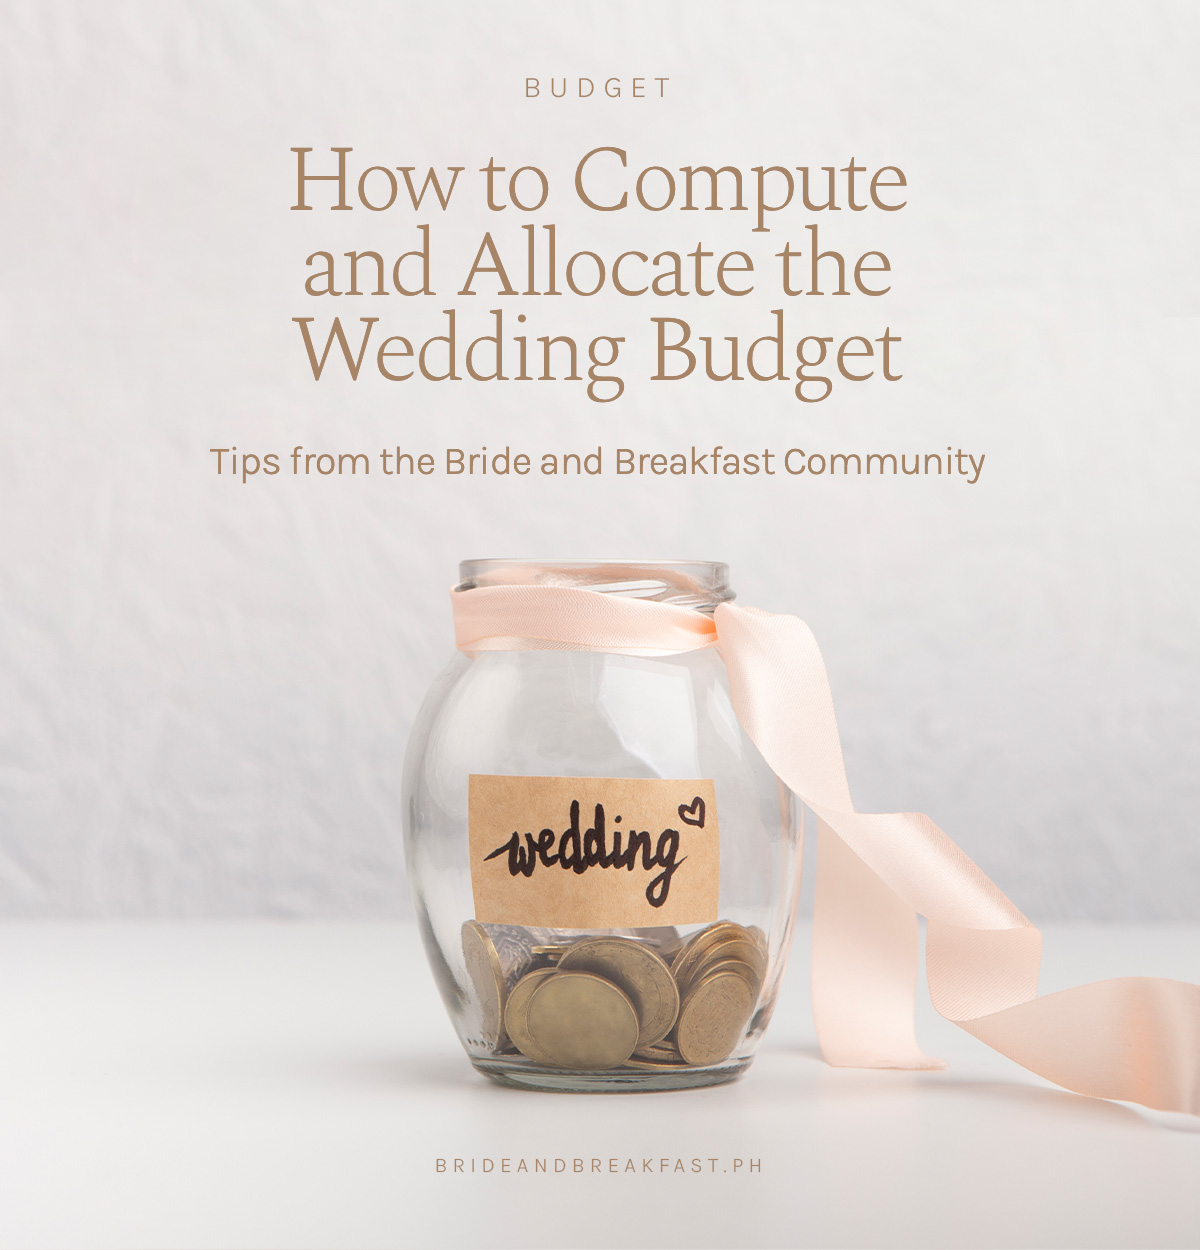 How to Compute and Allocate the Wedding Budget: Tips from the Bride and Breakfast Community